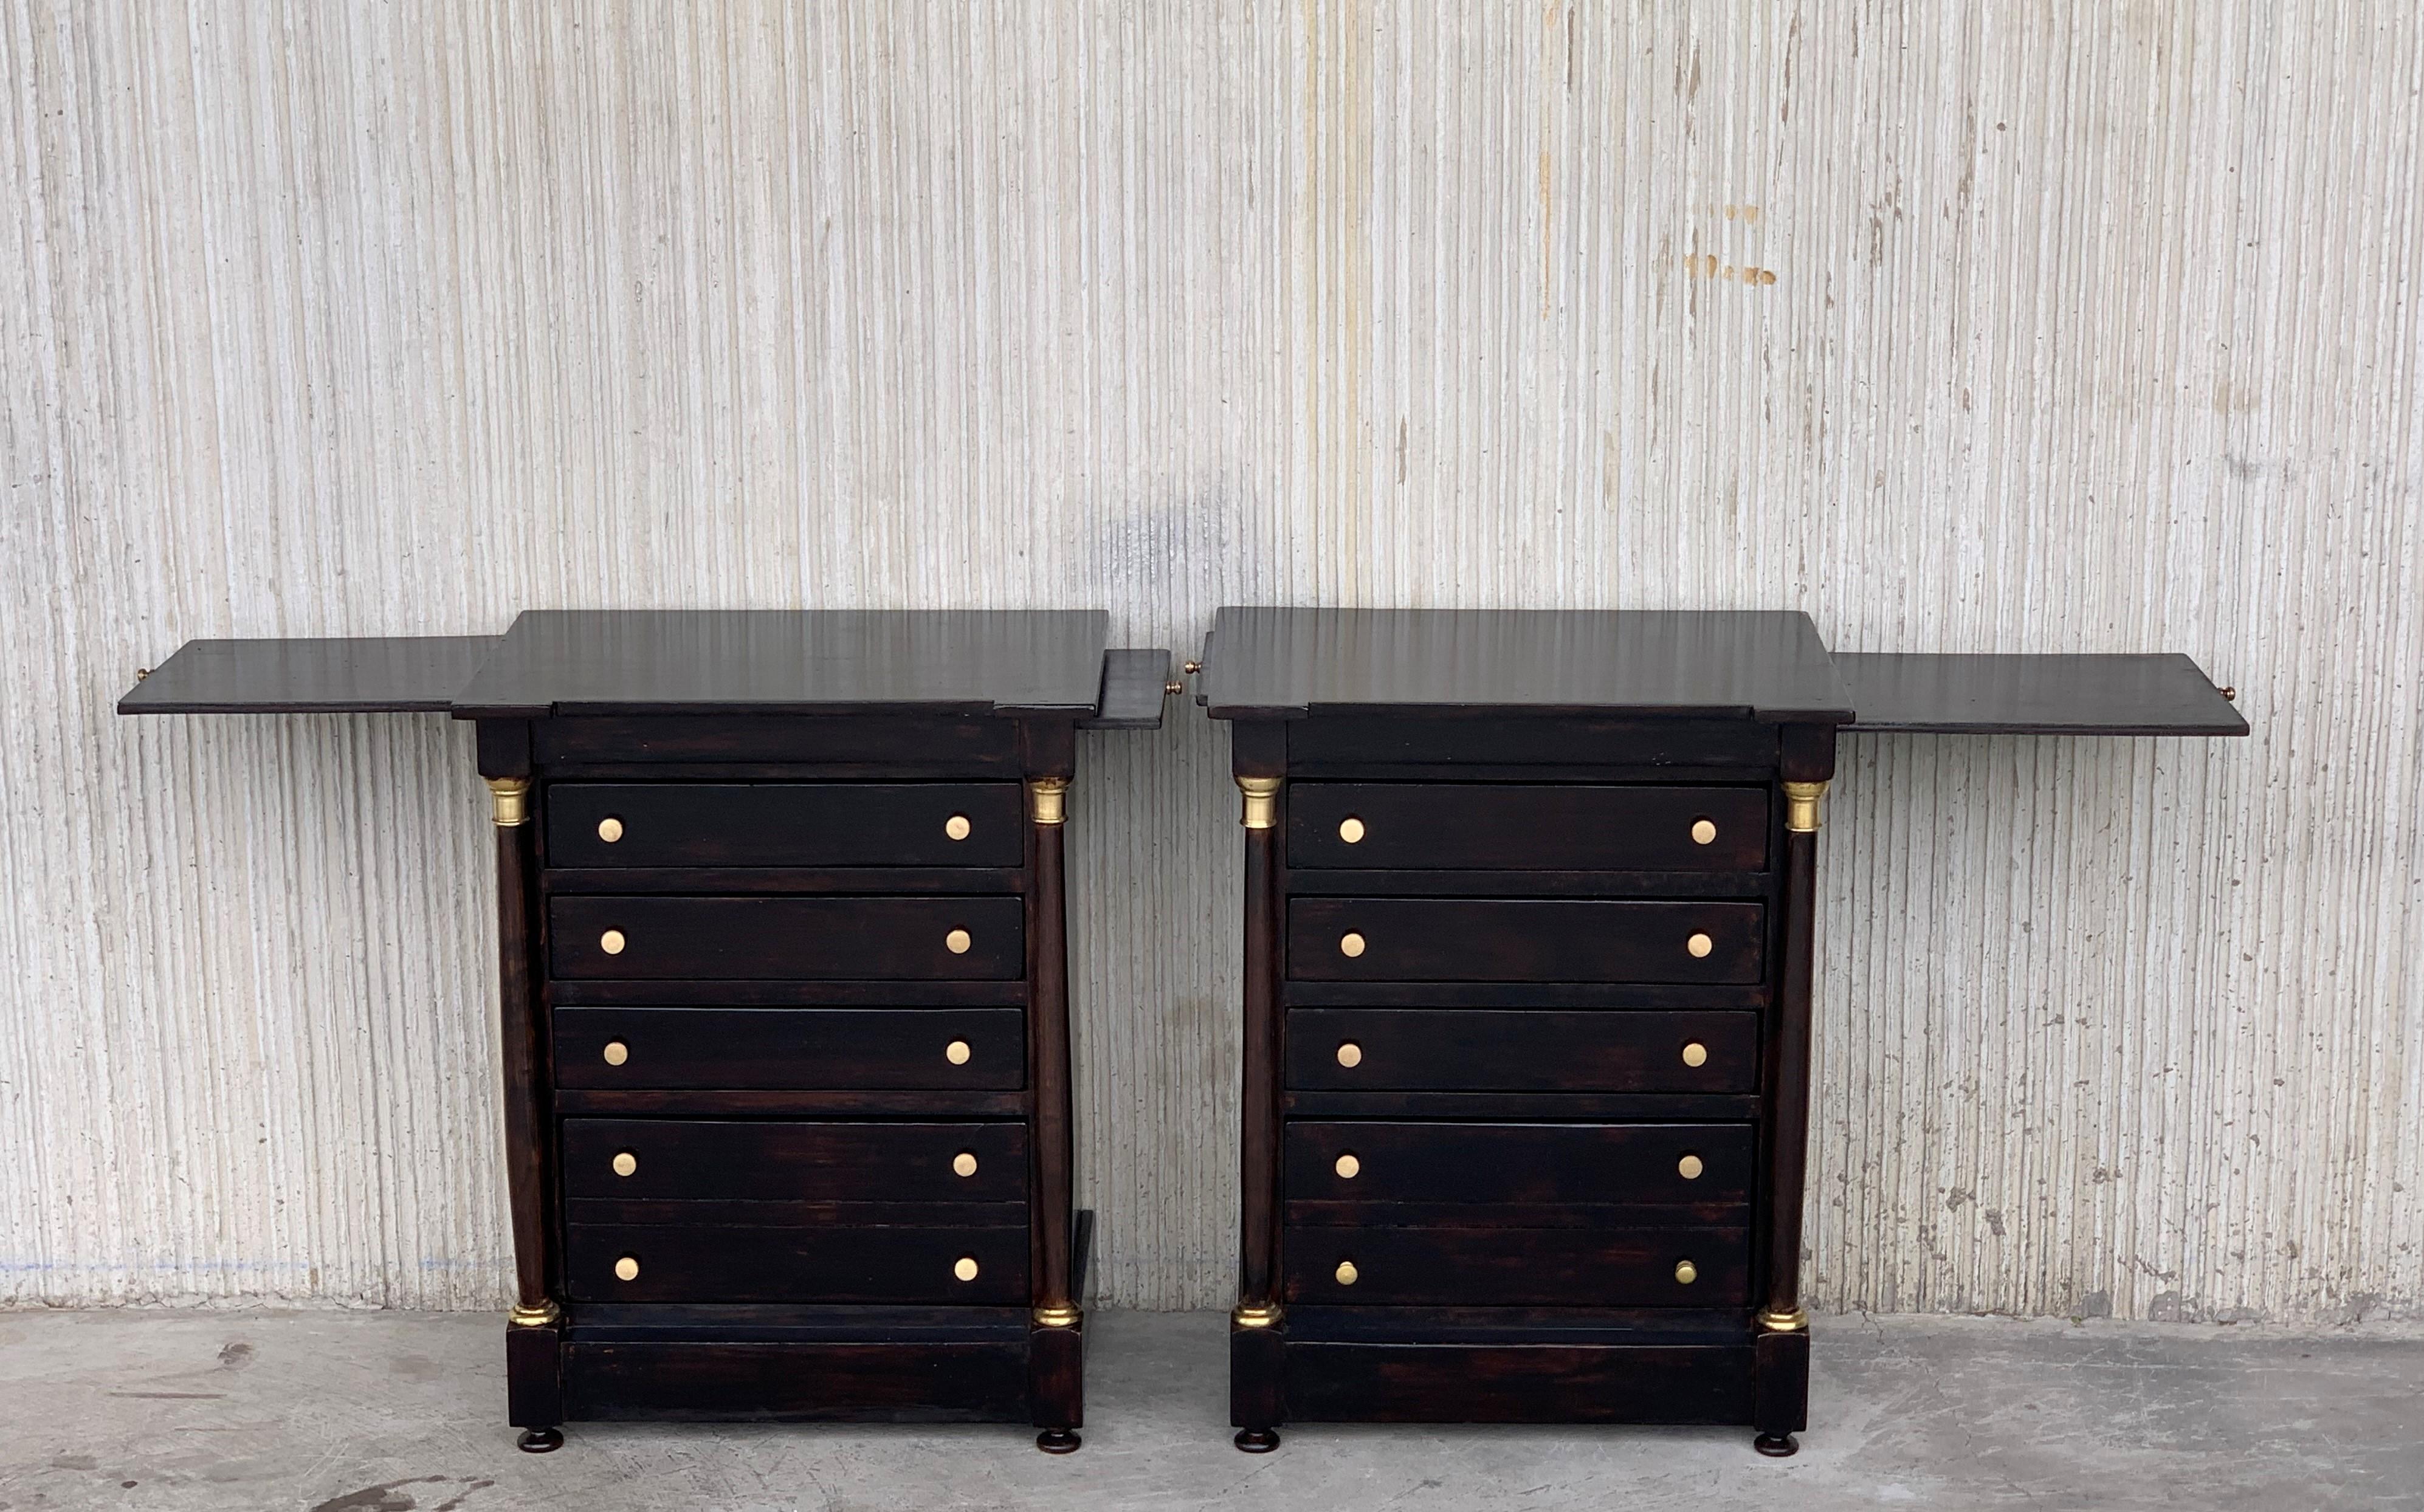 19th century French Louis XVI black ebonized nightstands or side table with four drawers and columns in the sides.
The tables have two hidden trays in both sides for more uses.